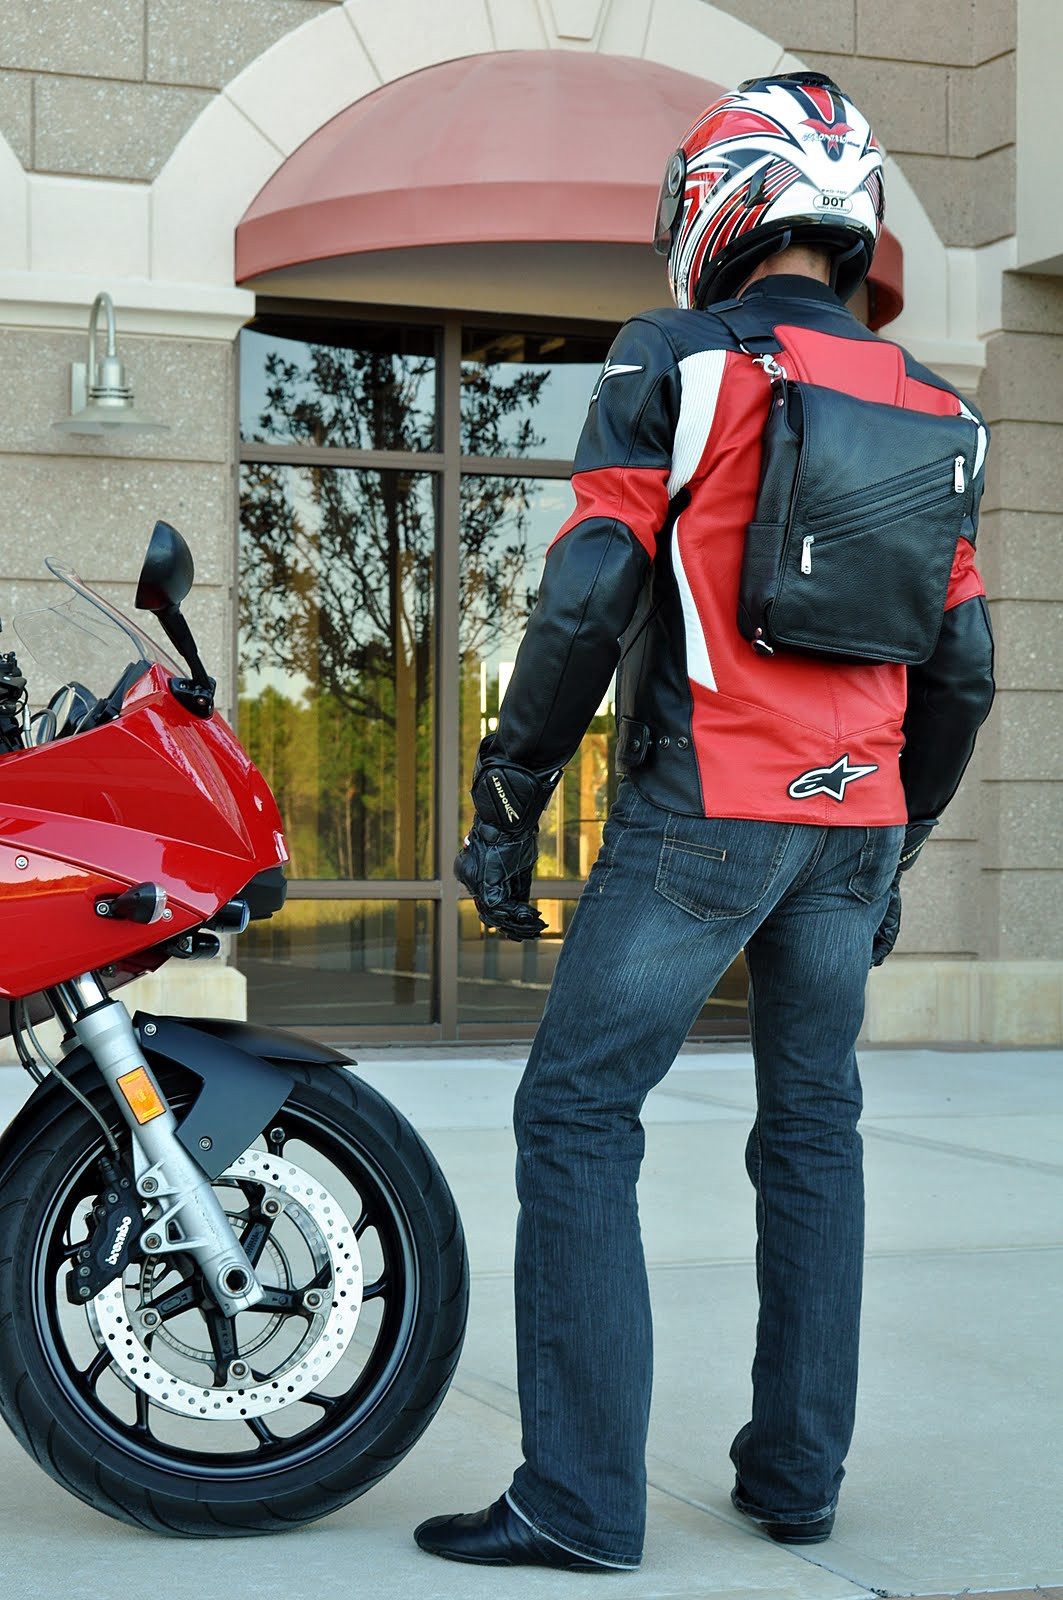 Your iPad is safe, and your Platforma messenger bag comfortably rests on your back.